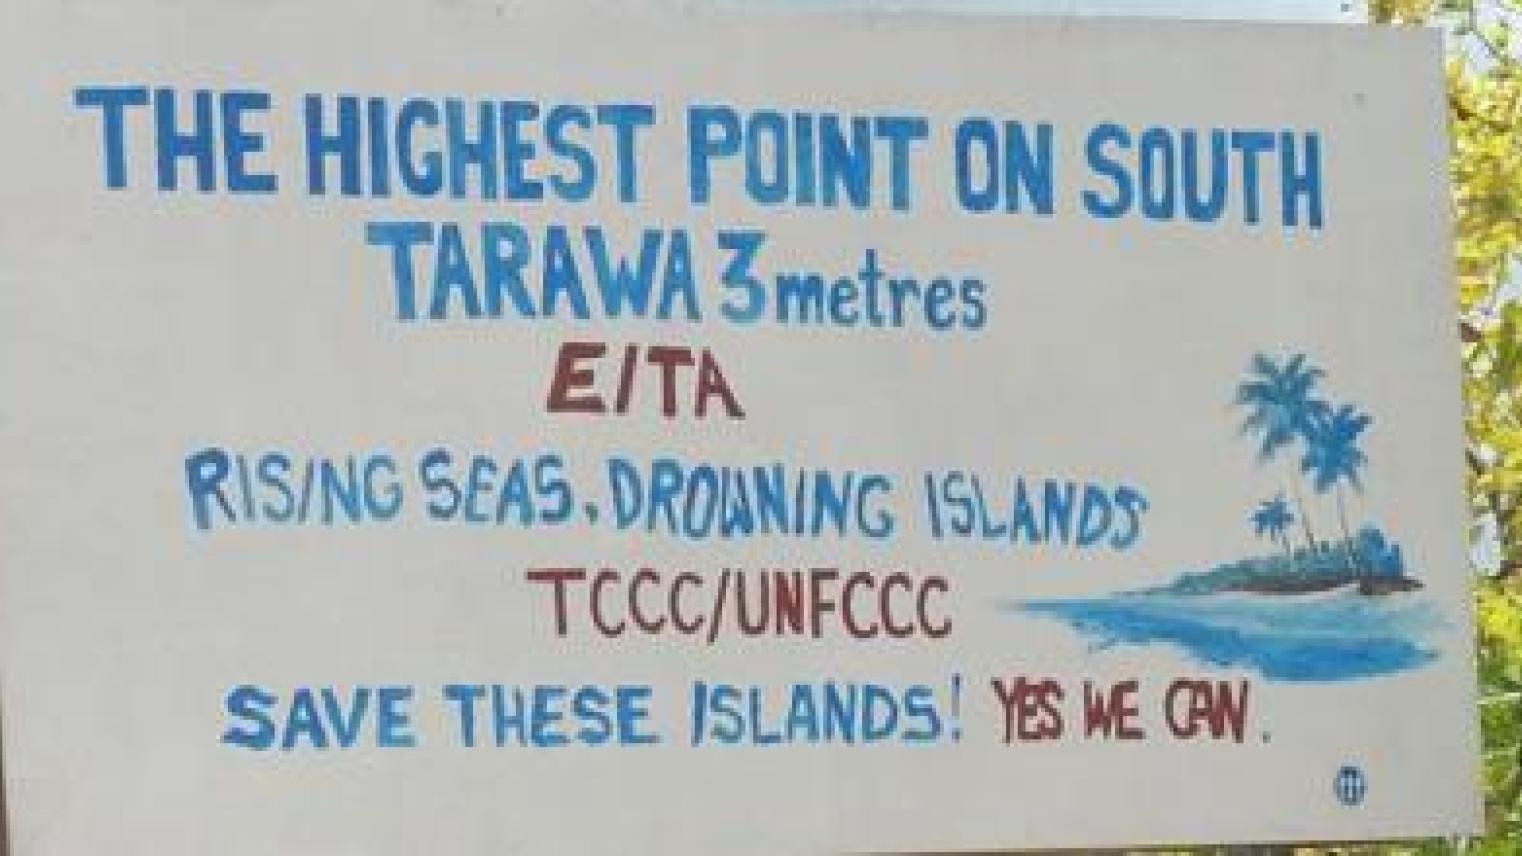 Image credit: Image of a sign on South Tarawa, Kiribati, warning of the threat of sea level rise to the island, with its highest point being 3 metres above sea level, from Wikipedia Commons, (CC BY 2.0).